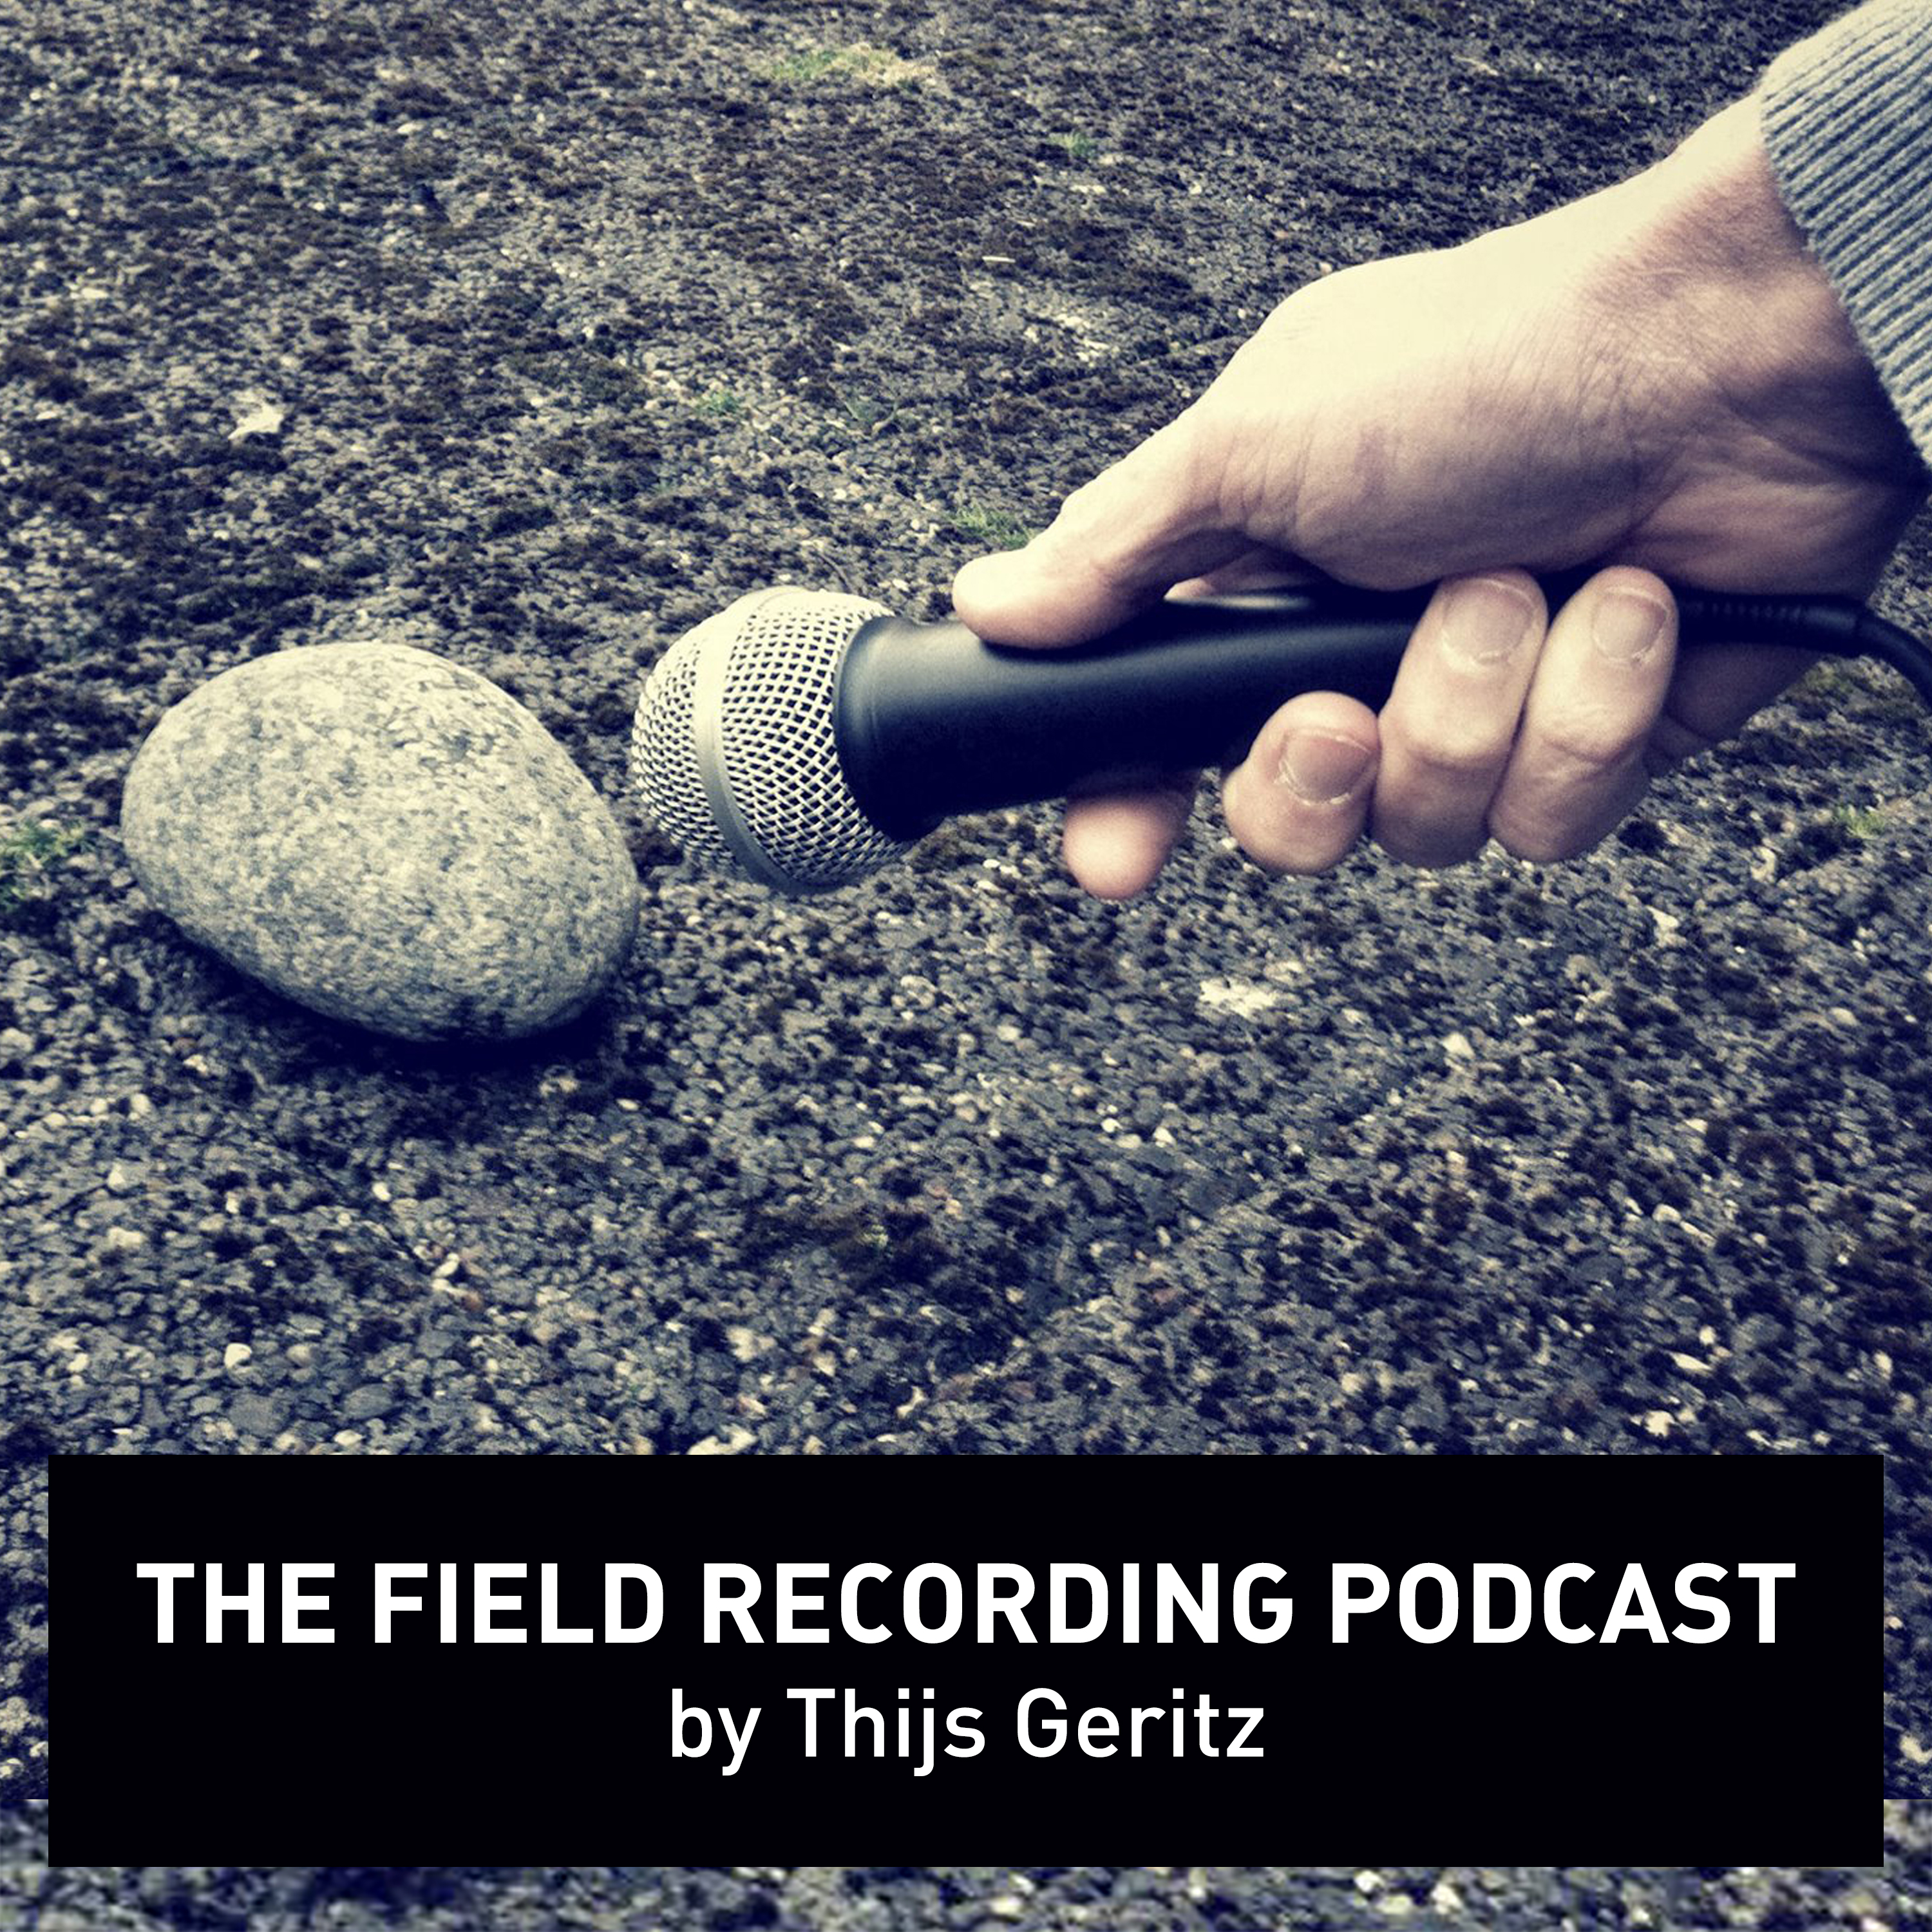 The Field Recording PodCast by Thijs Geritz